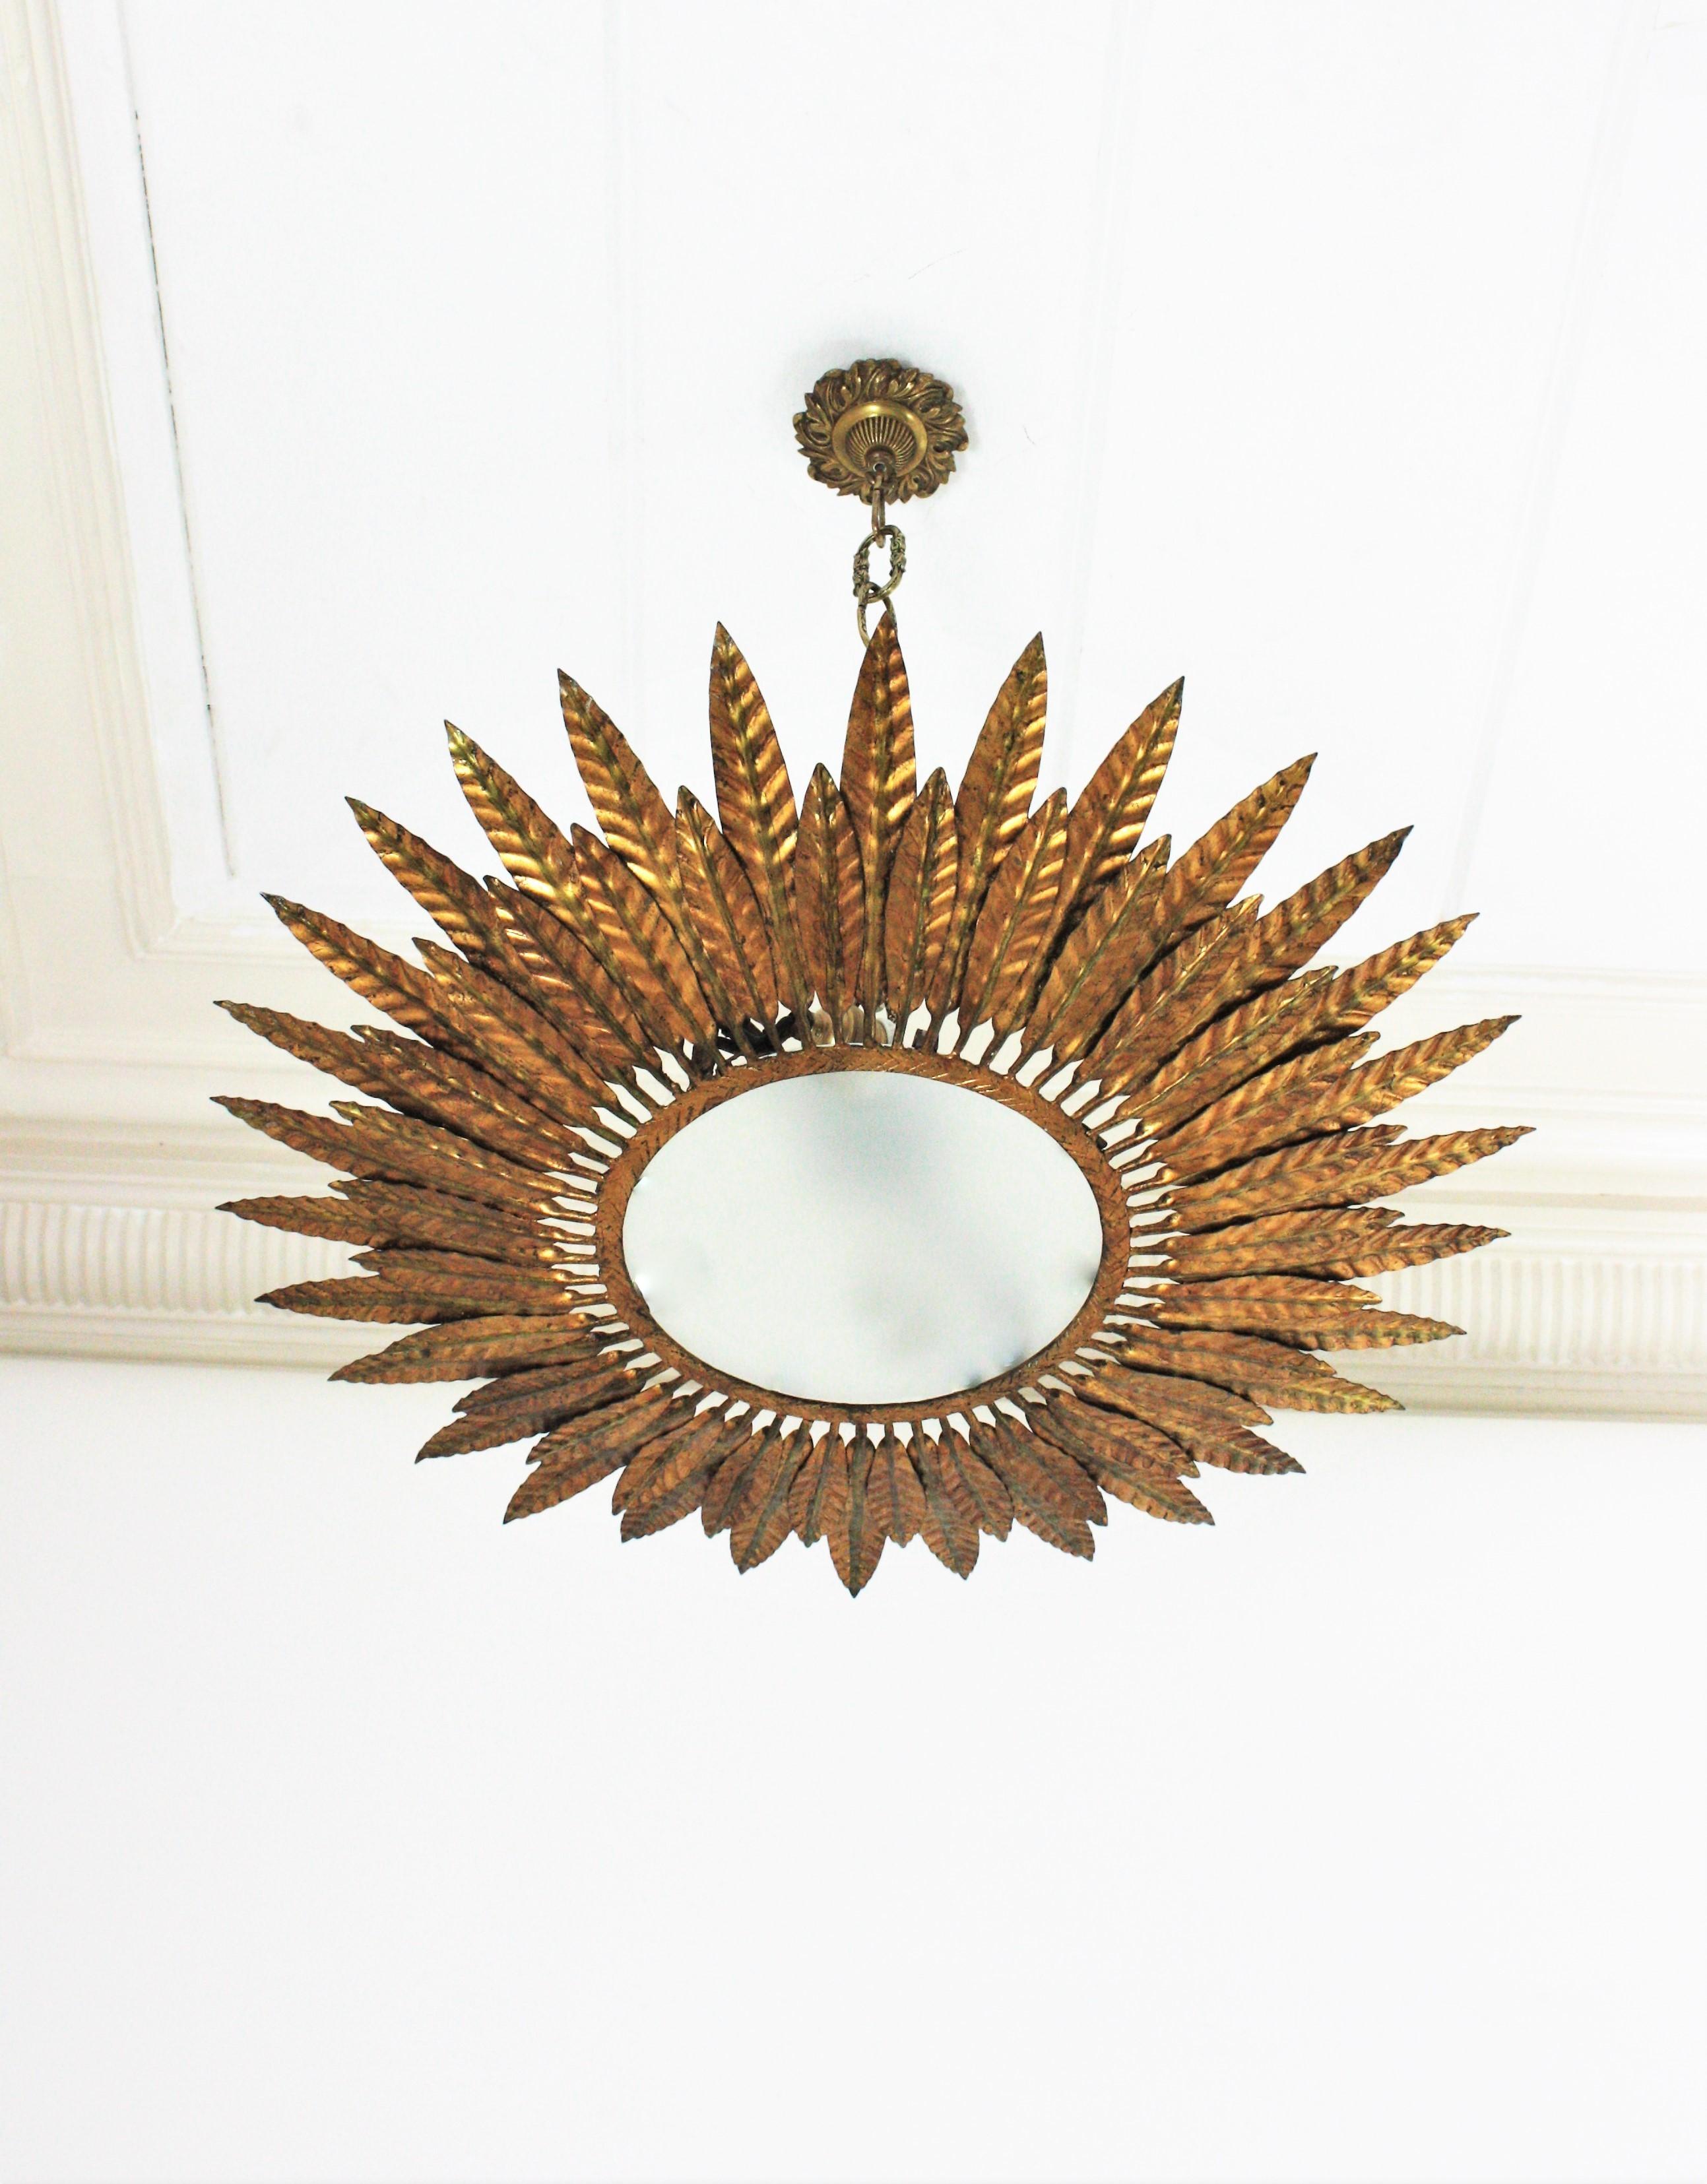 Mid-Century Modern gilt iron sunburst flush mount or pendant with leaf motifs surrounding a central frosted glass diffuser, Spain, 1950s.
Handcrafted in hammered iron with gold leaf finishing.
Nice aged patina and glamorous original gold leaf